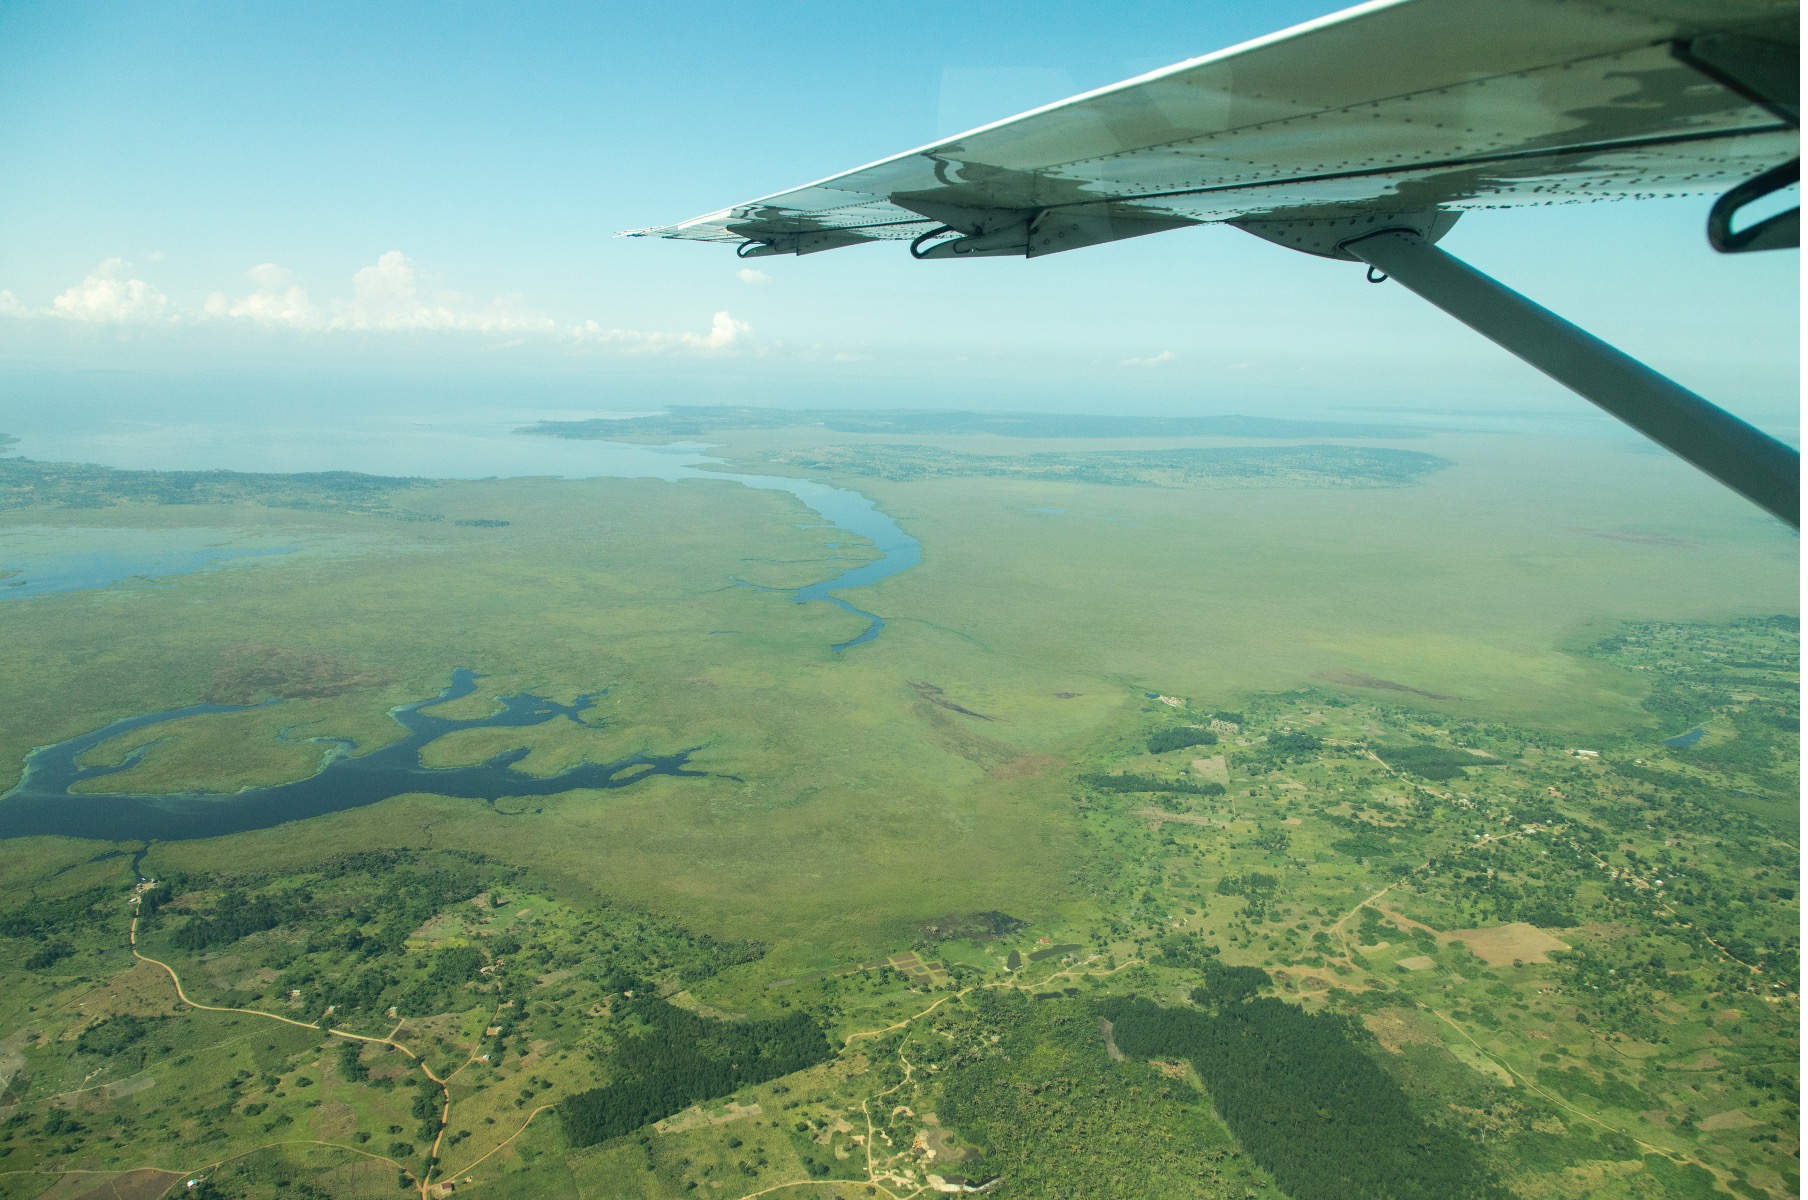 a photo is taken out of a small bushplane in Uganda with forest below